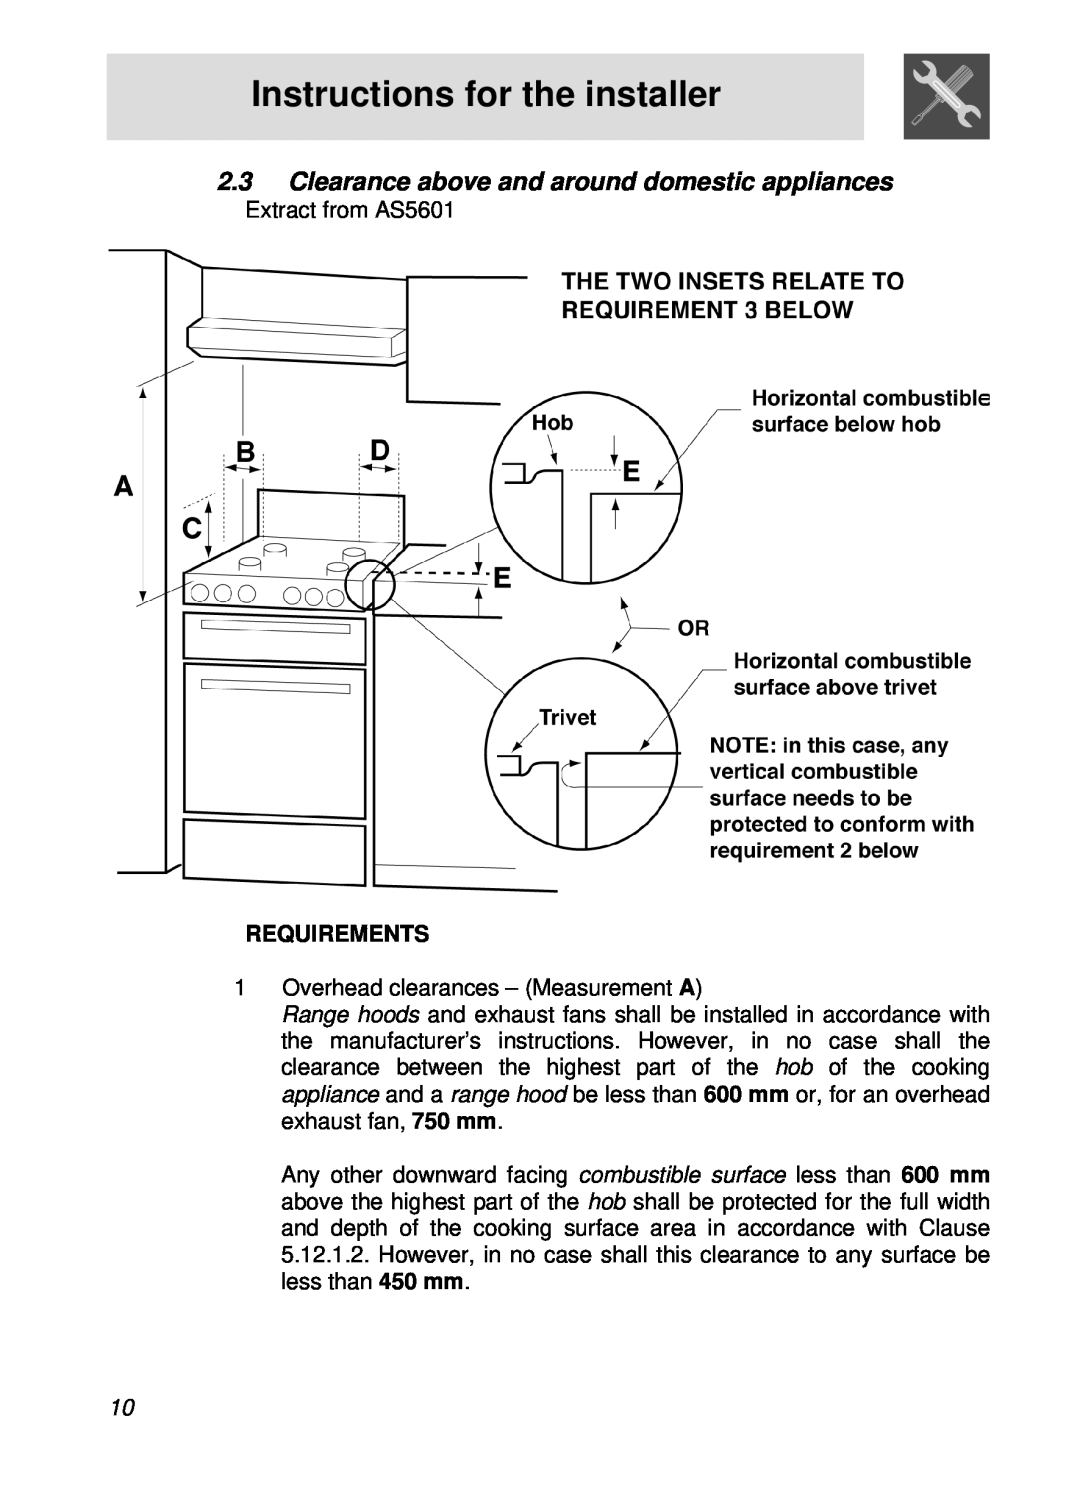 Smeg PGFA95F-1 manual 2.3Clearance above and around domestic appliances, Instructions for the installer, Requirements 